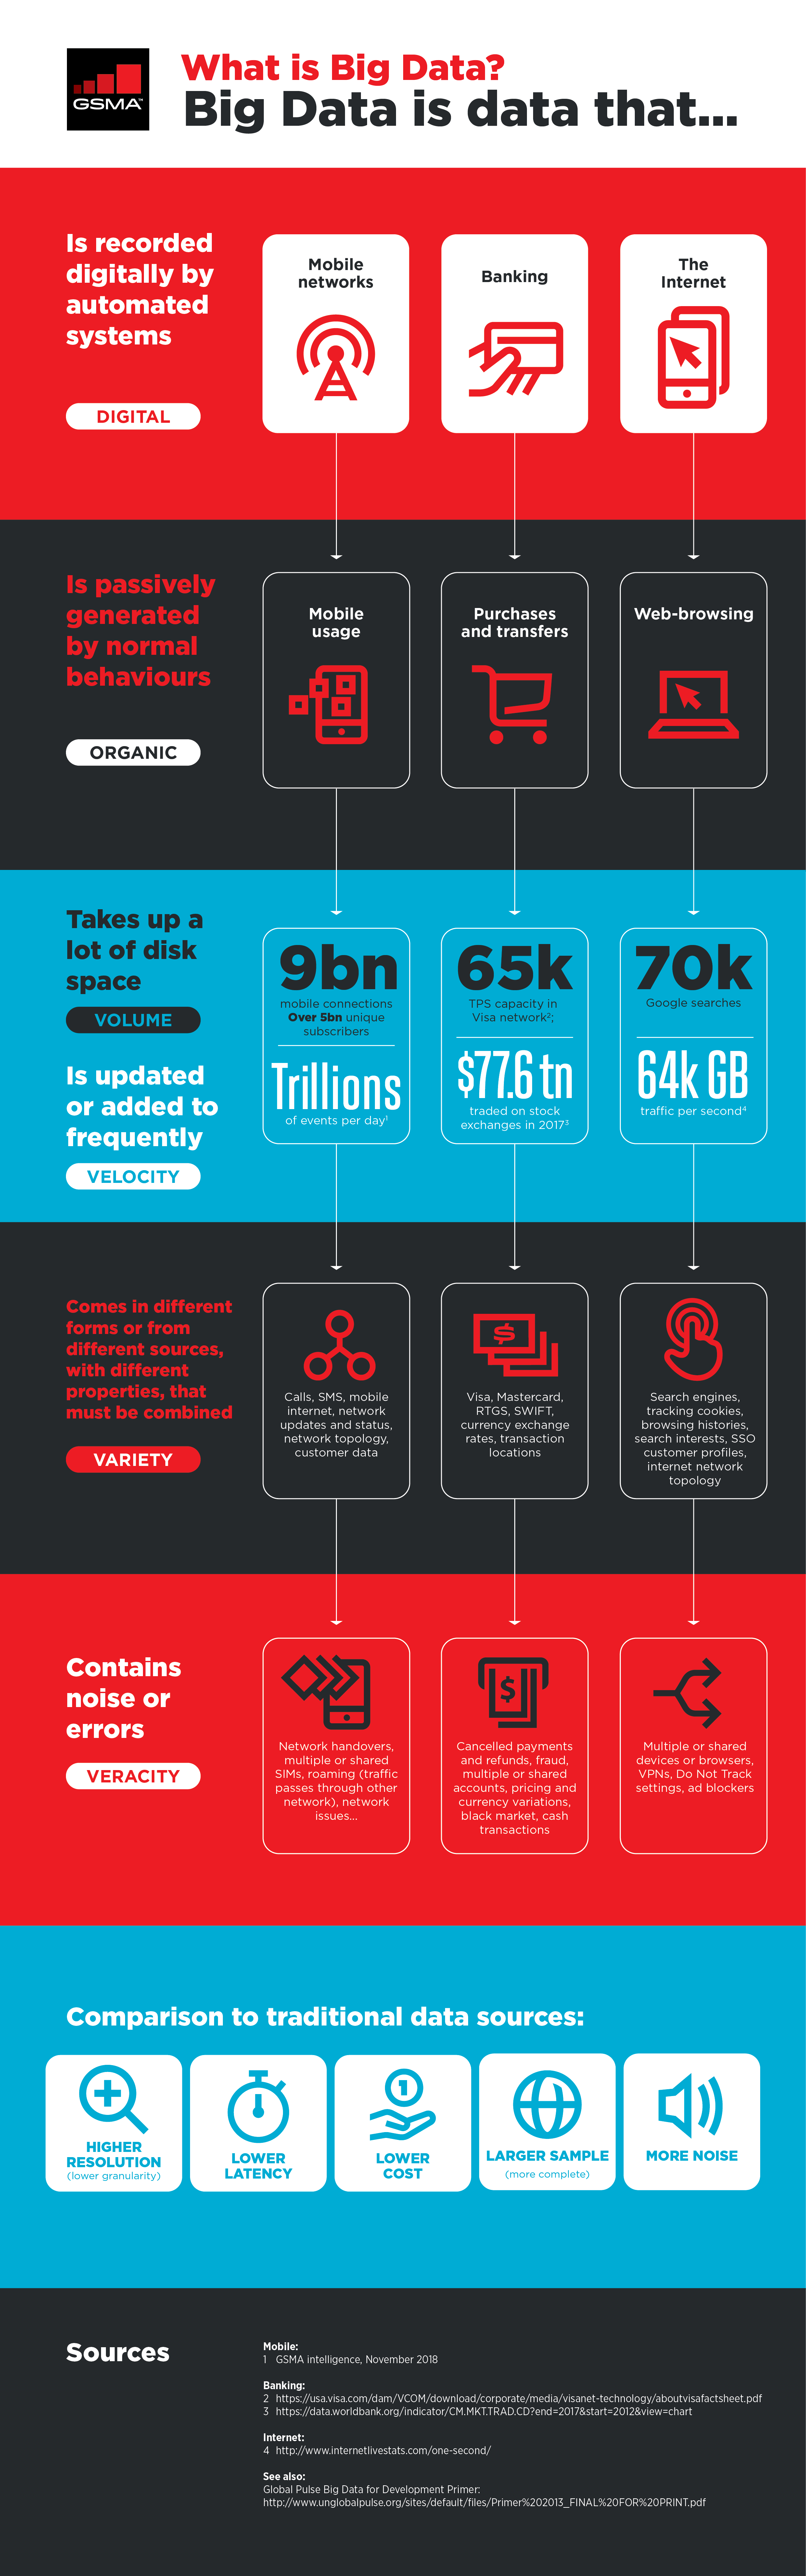 What Is Big Data Infographic V3